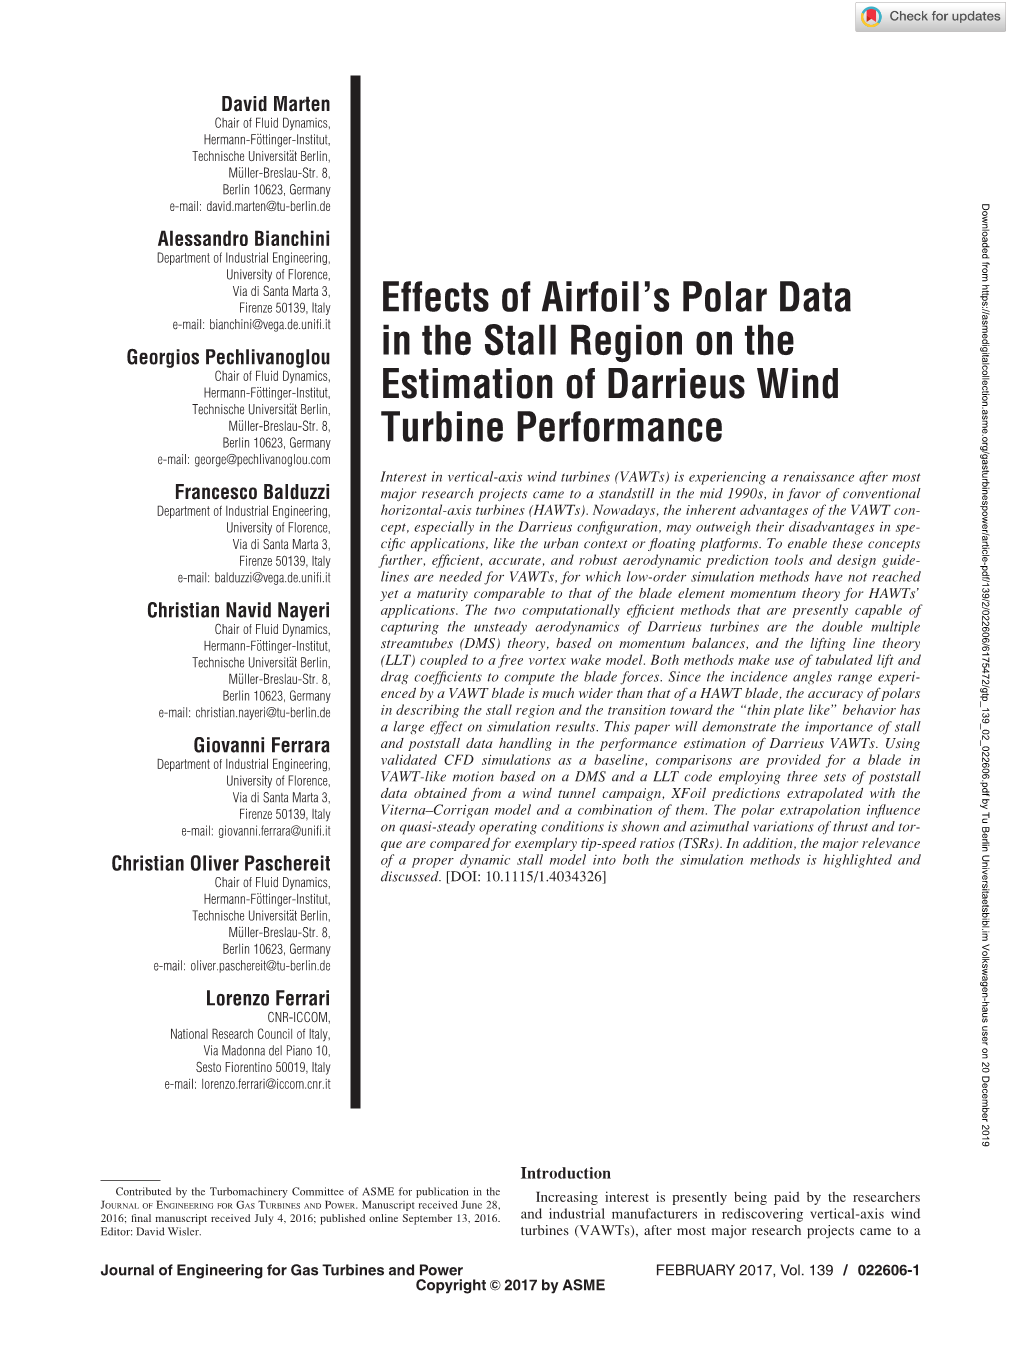 Effects of Airfoil's Polar Data in the Stall Region on The